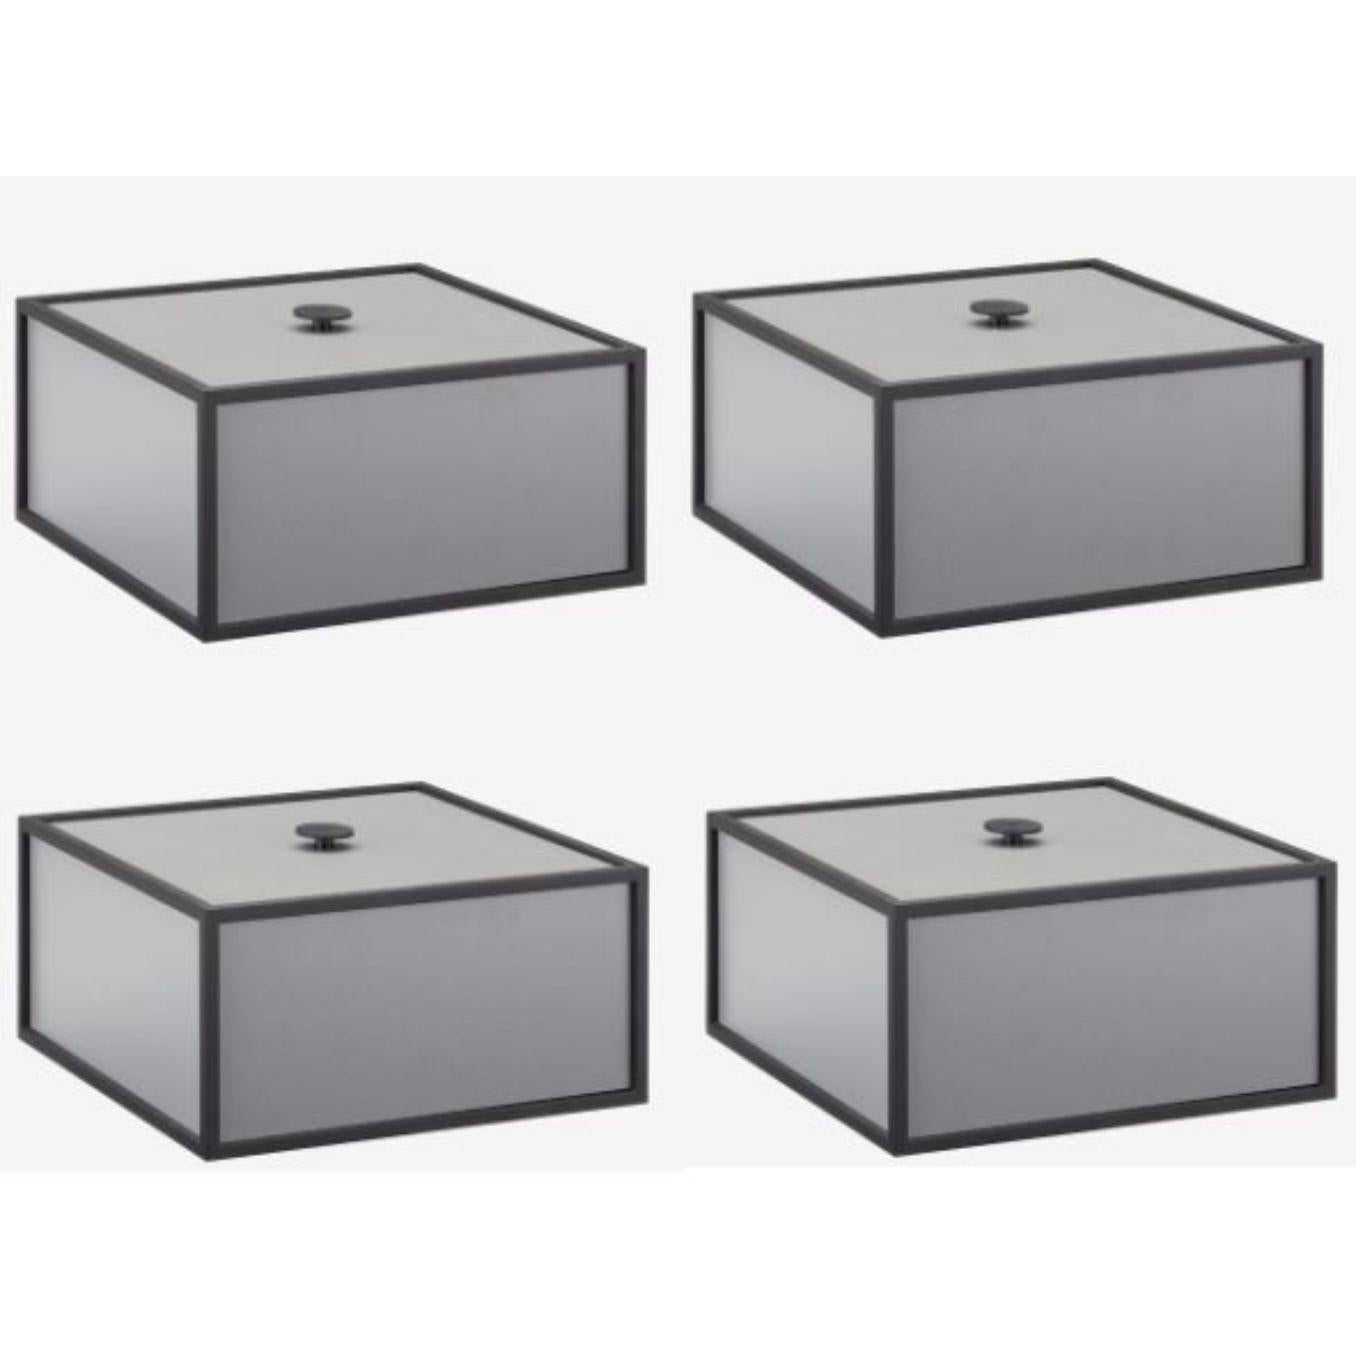 Set of 4 dark grey frame 20 box by Lassen
Dimensions: D 20 x W 20 x H 10 cm 
Materials: melamin, melamine, metal, veneer
Weight: 2.00 Kg

Frame Box is a square box in a cubistic shape. The simple boxes are inspired by the Kubus candleholder by